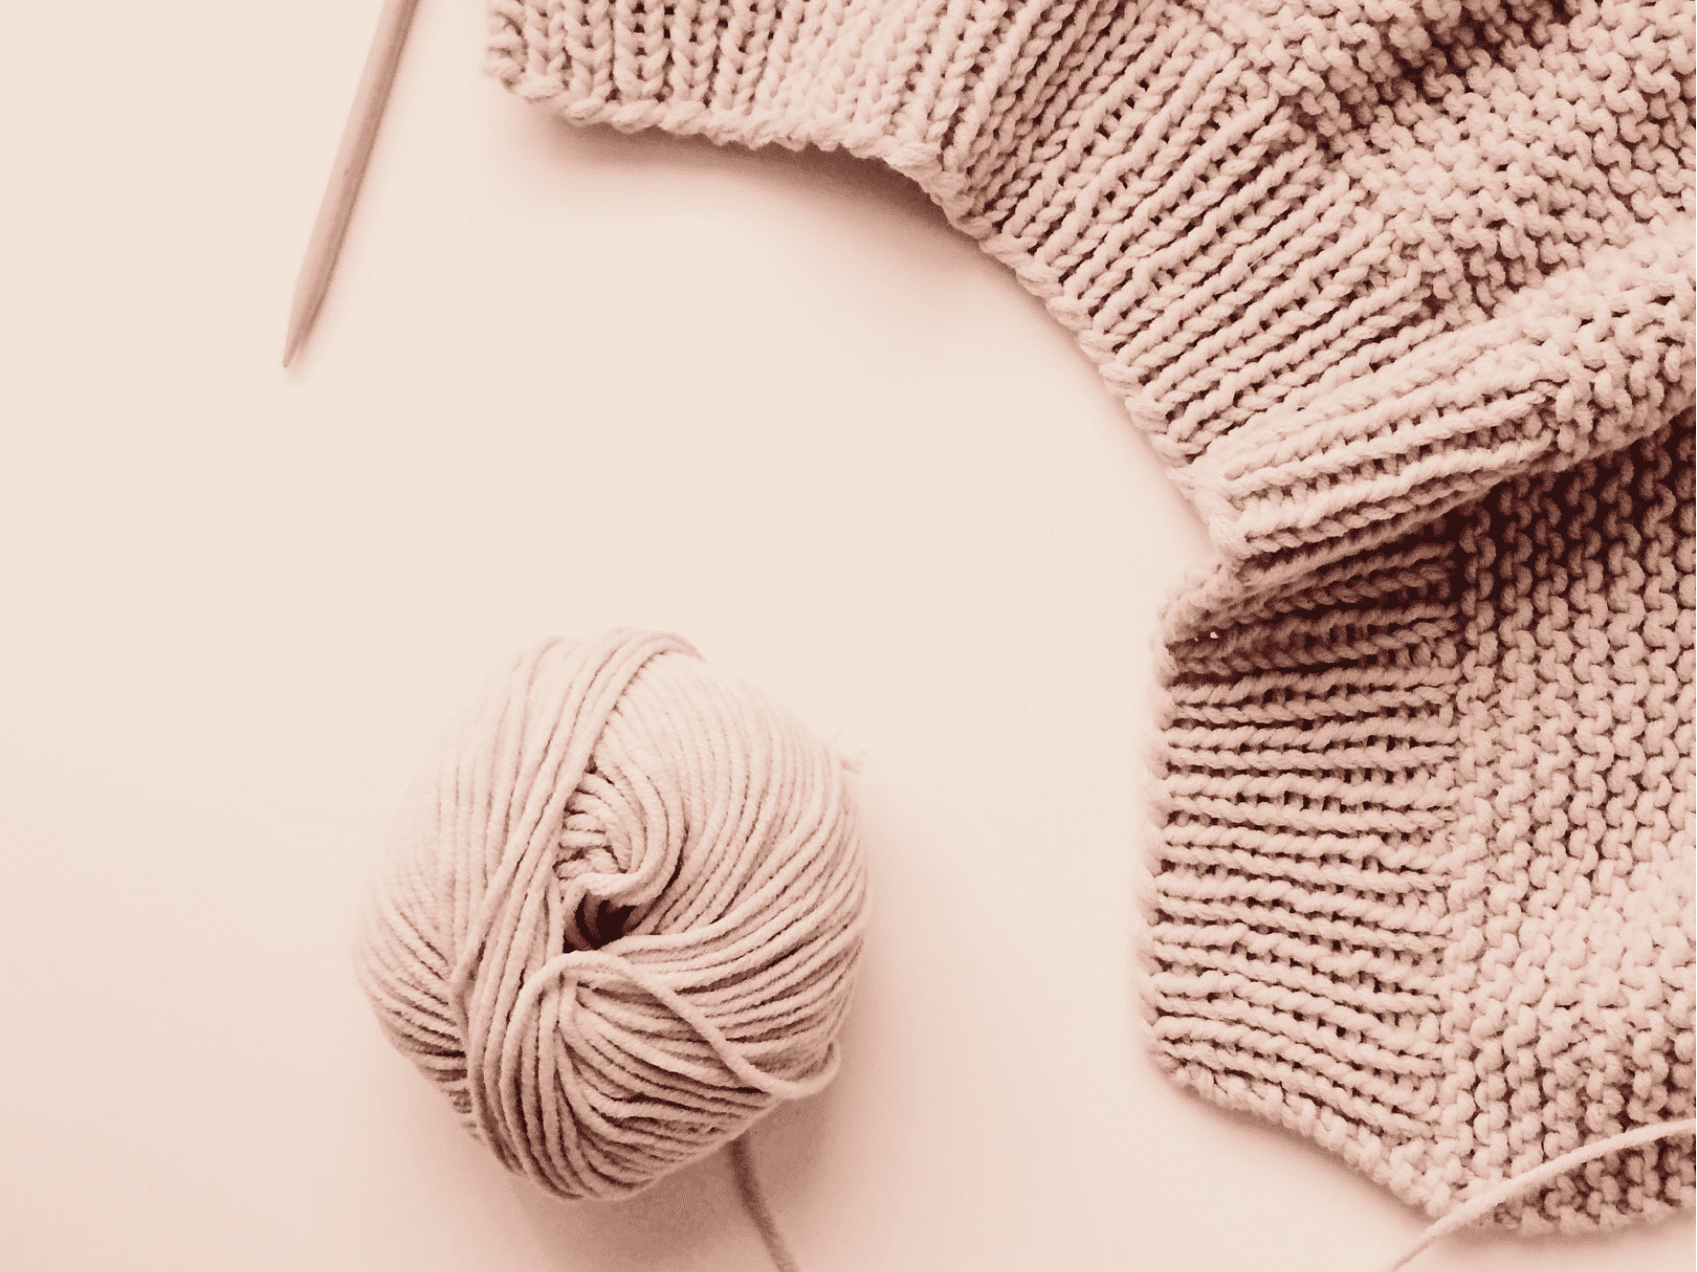 Knitting and Website building are kind of share similar prinicples - Featured image